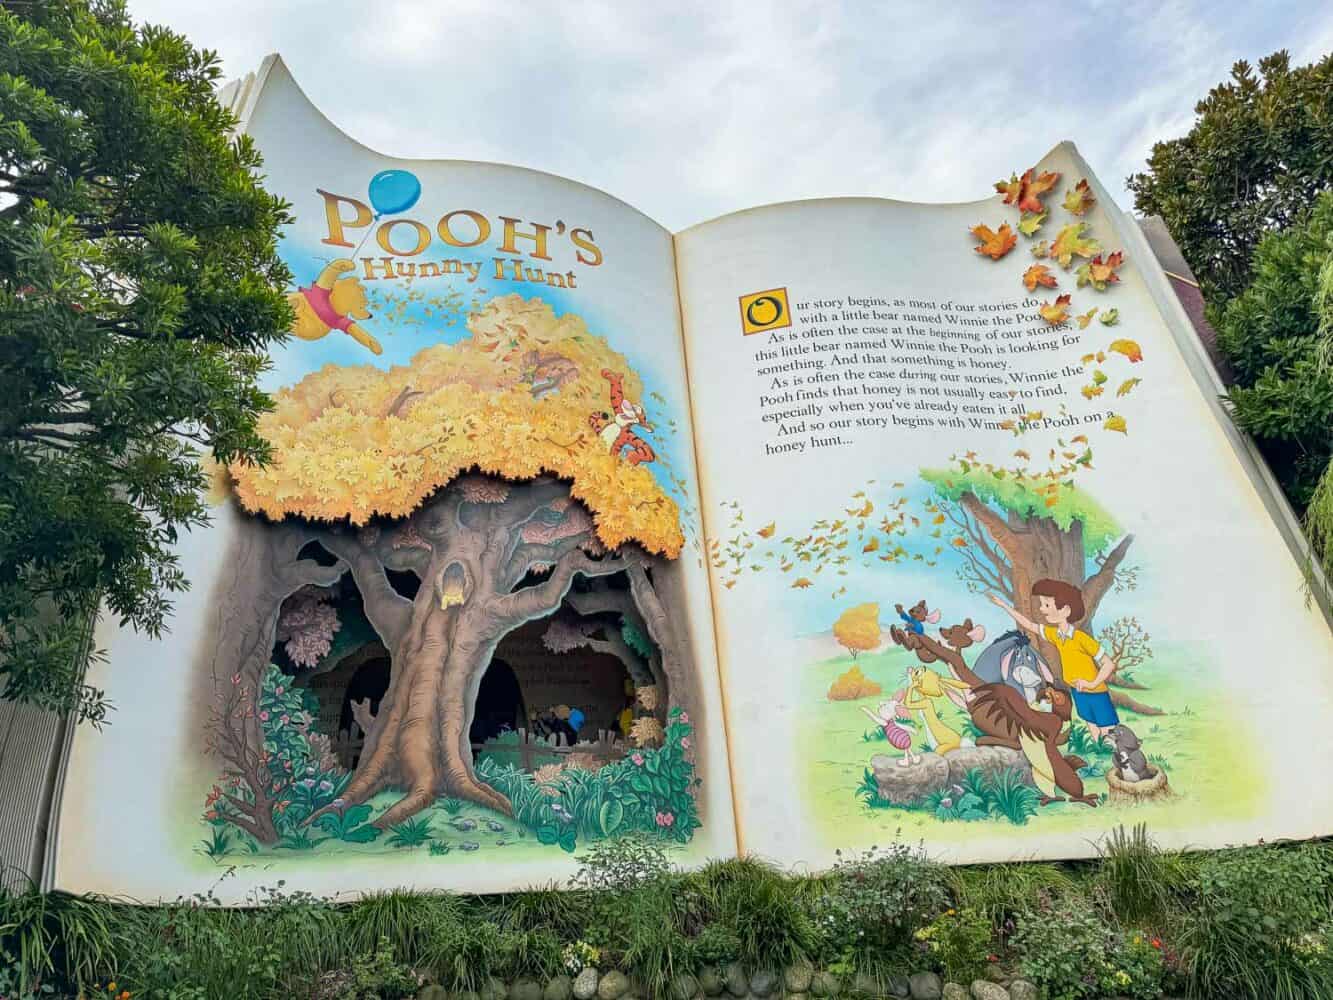 Giant book in the queue at Pooh's Hunny Hunt ride in Tokyo Disneyland